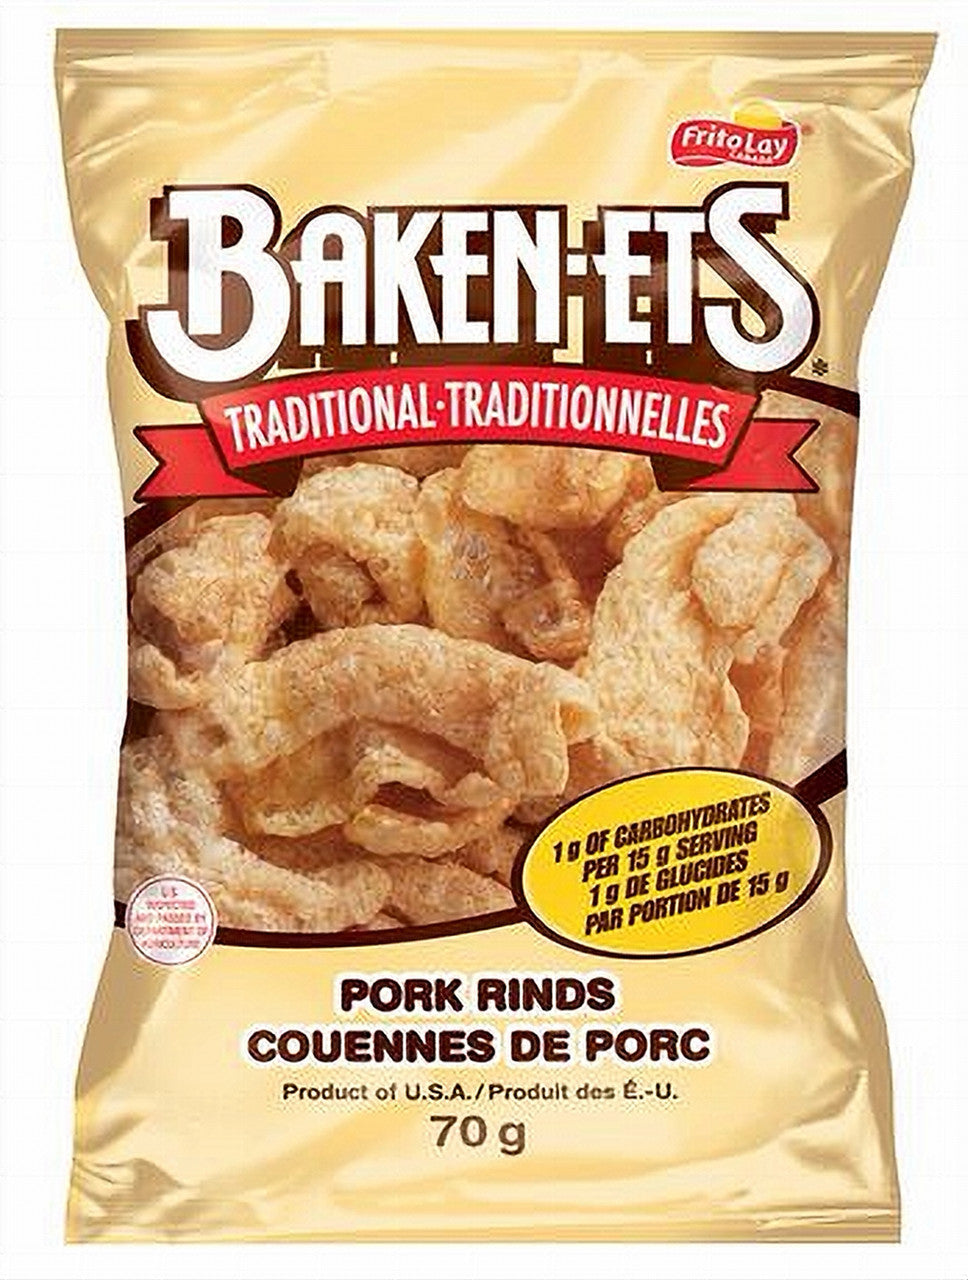 Baken-ets Bacon Flavoured Traditional Smoked Pork Rinds, (Pack of 2) 70g/2.5oz bags (Imported from Canada)